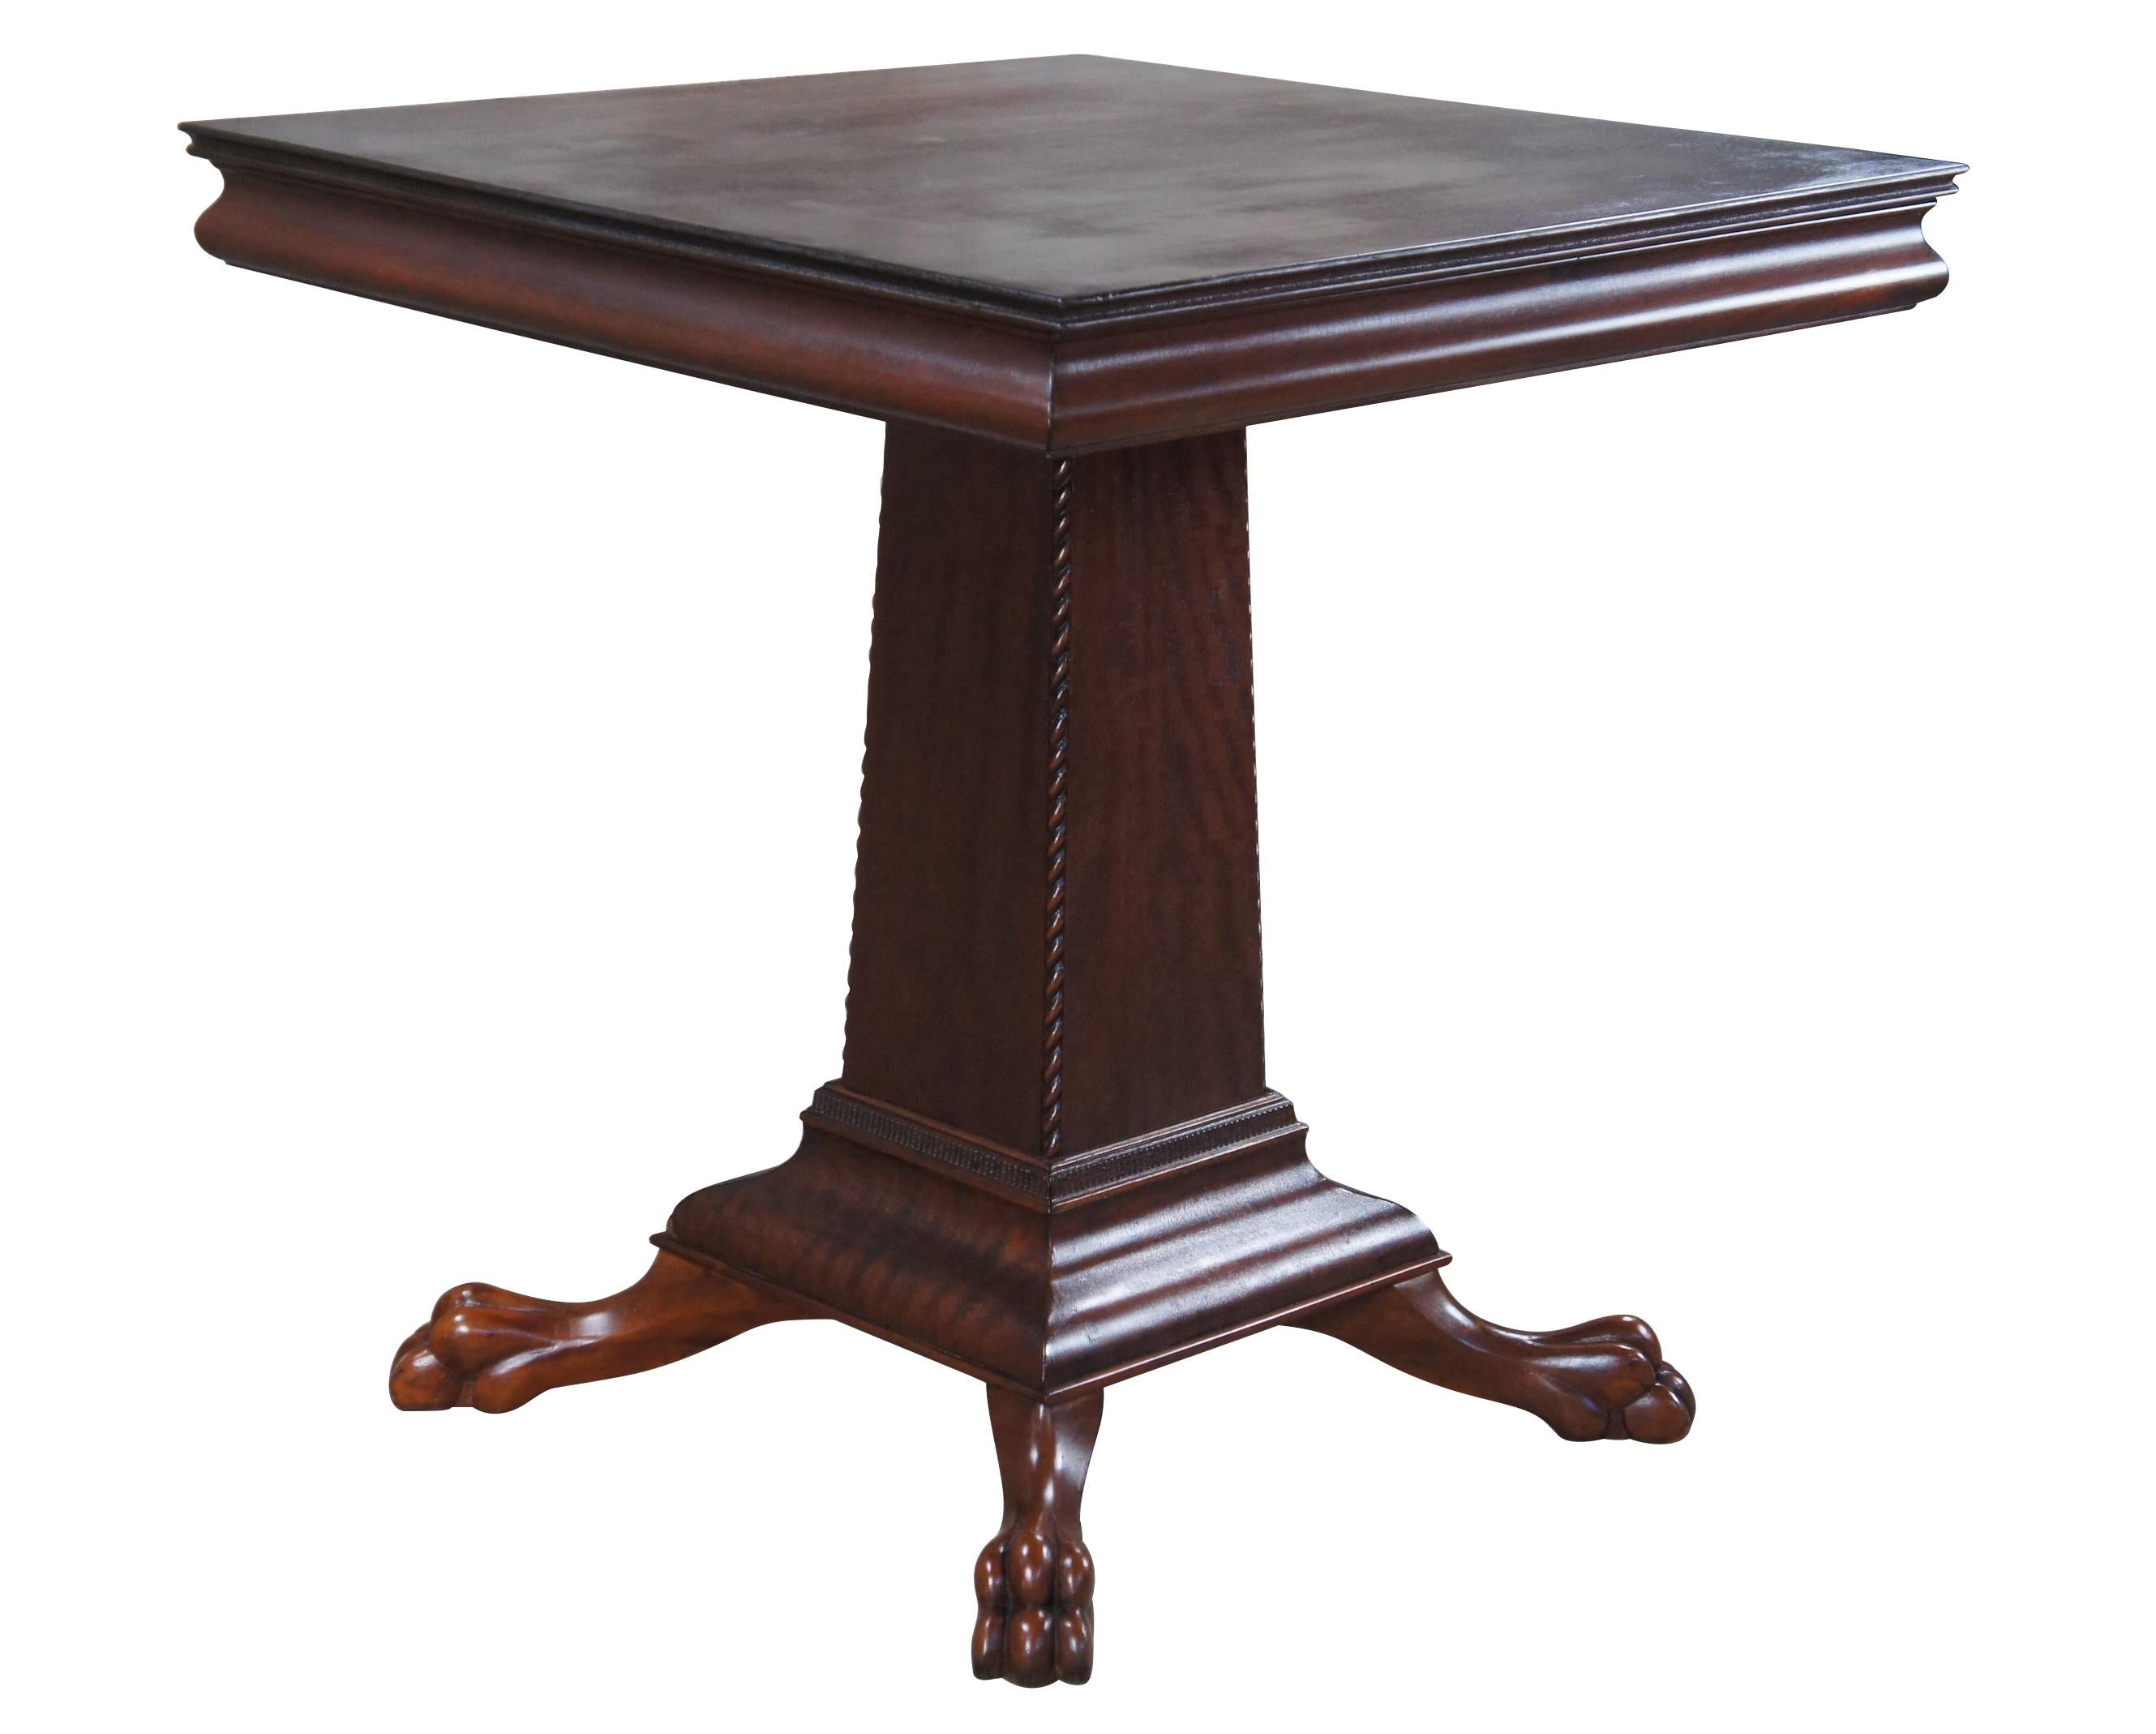 Antique American Empire mahogany game table featuring square form with a tapered pedestal, large carved claw feet, serpentine edge and twisted / fluted accents.